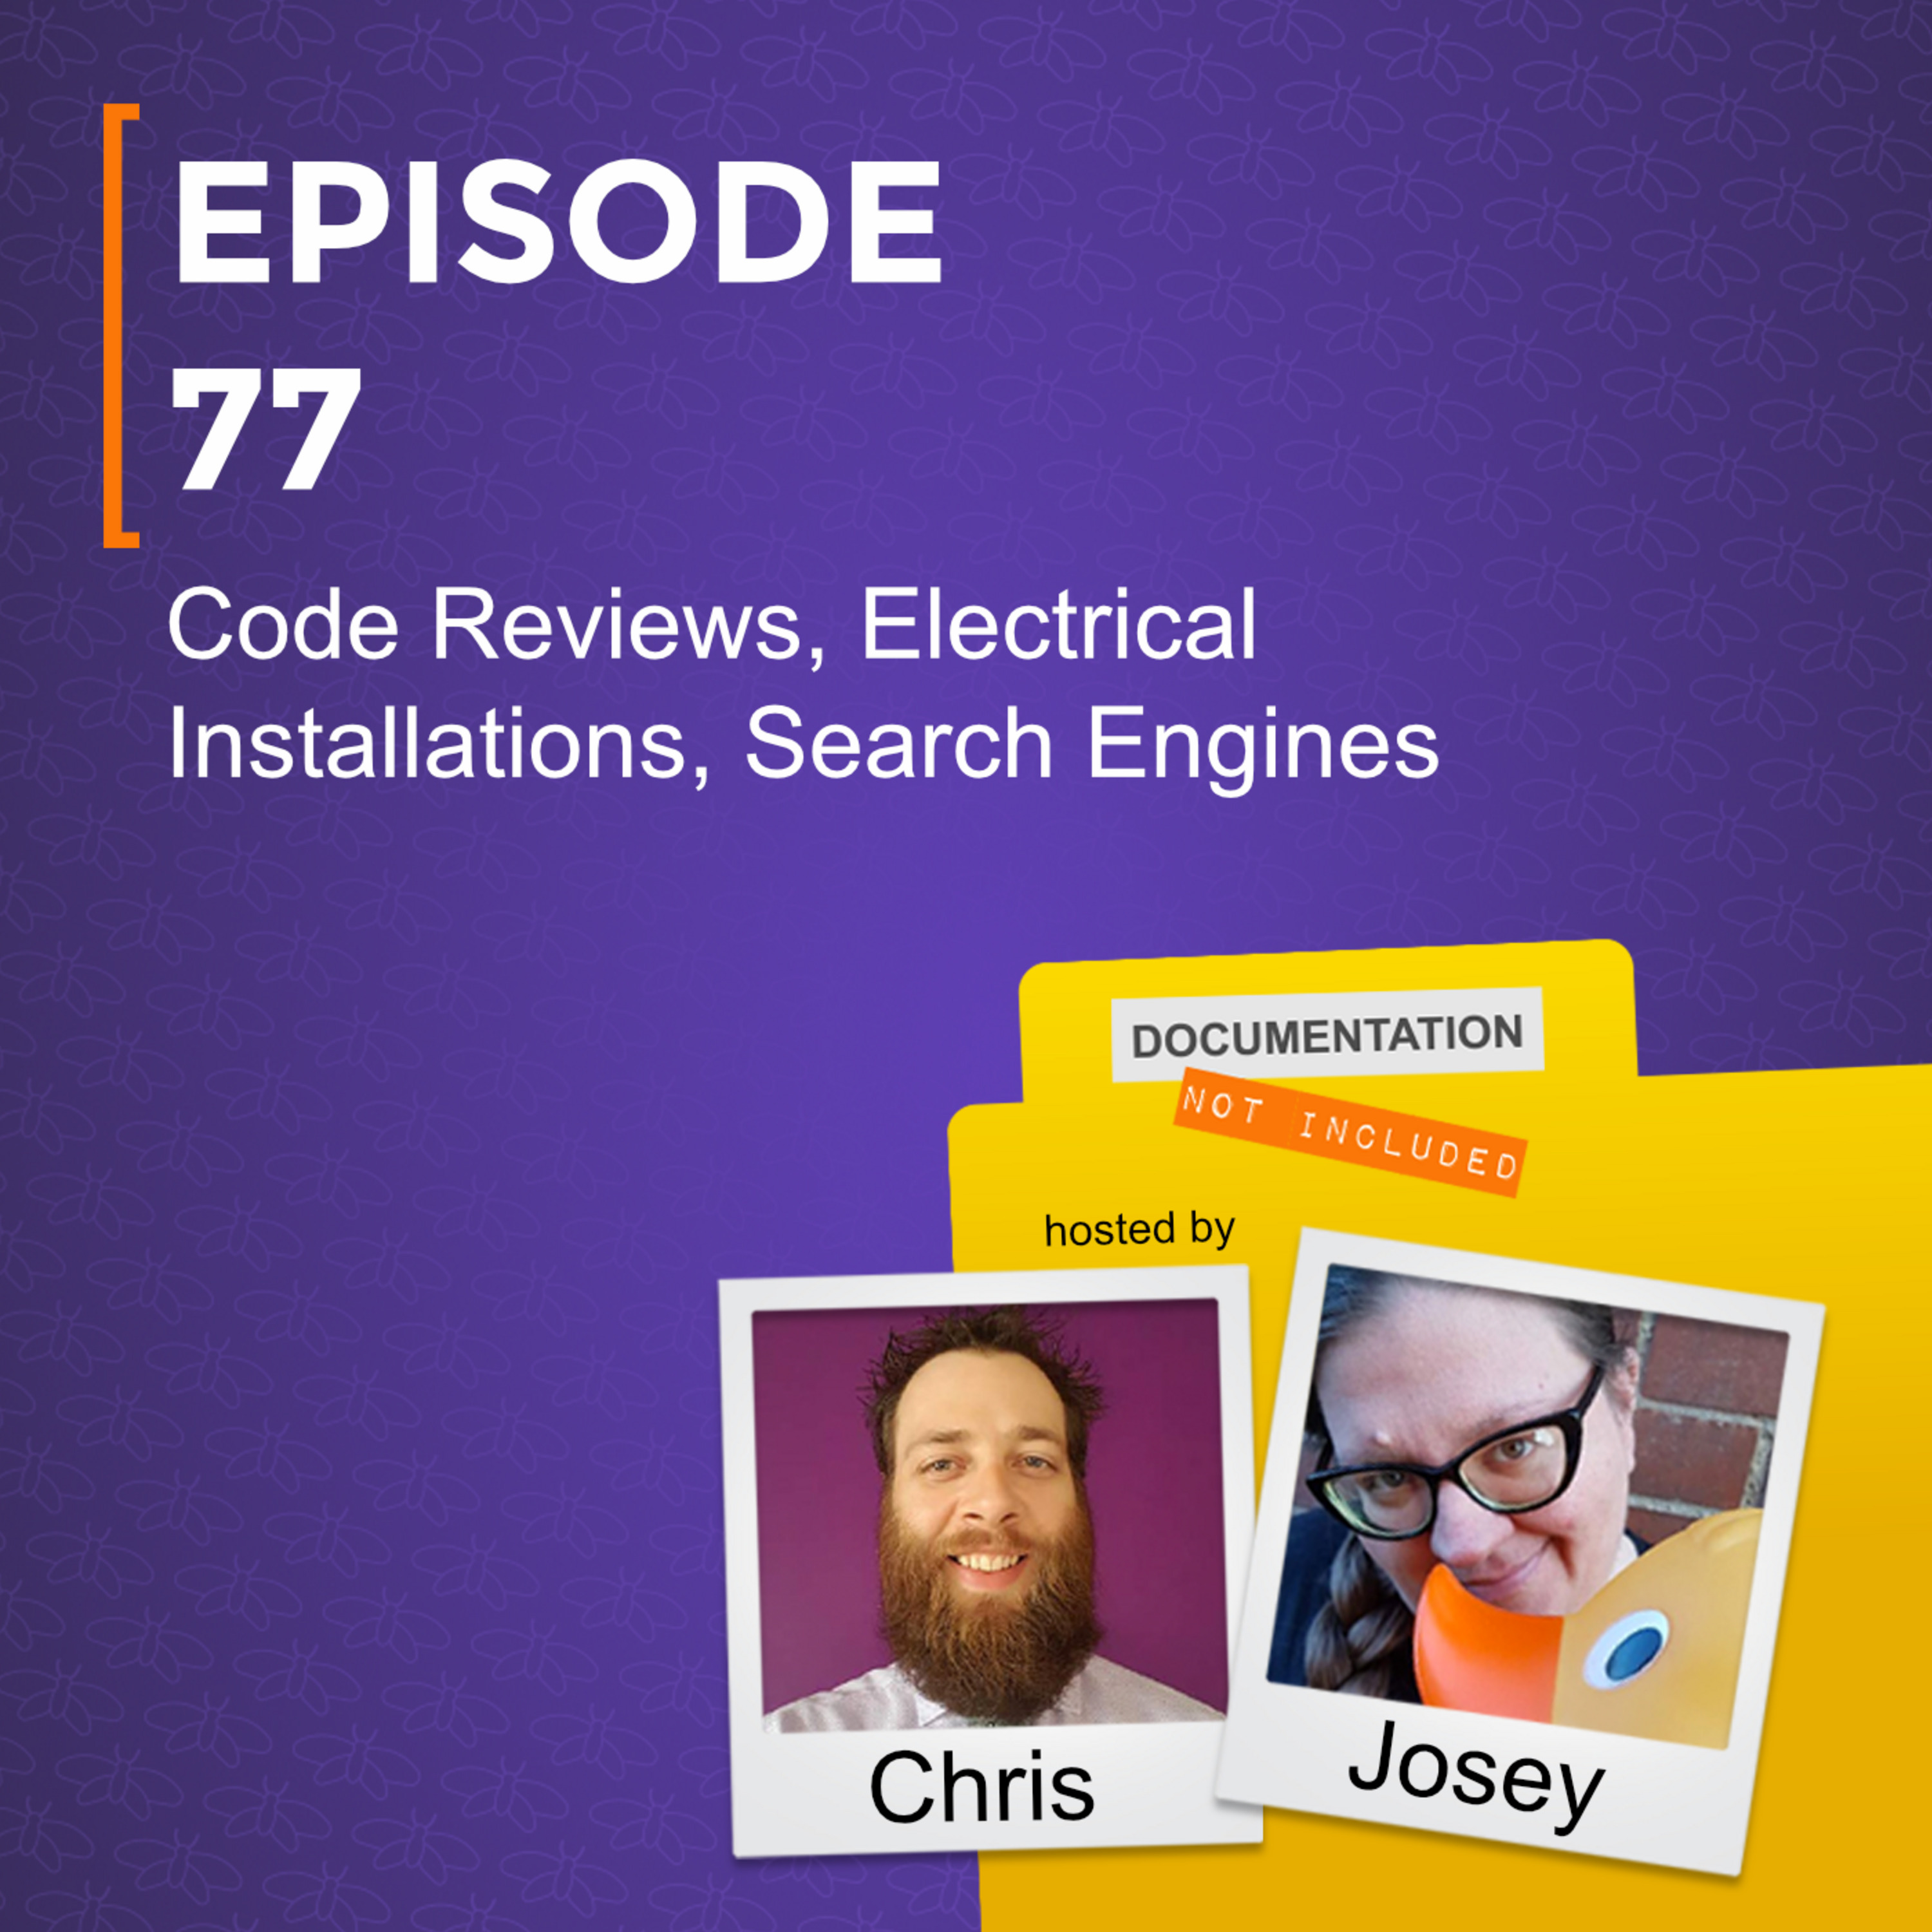 Ep 77 - Code Reviews, Electrical Installations, Search Engines